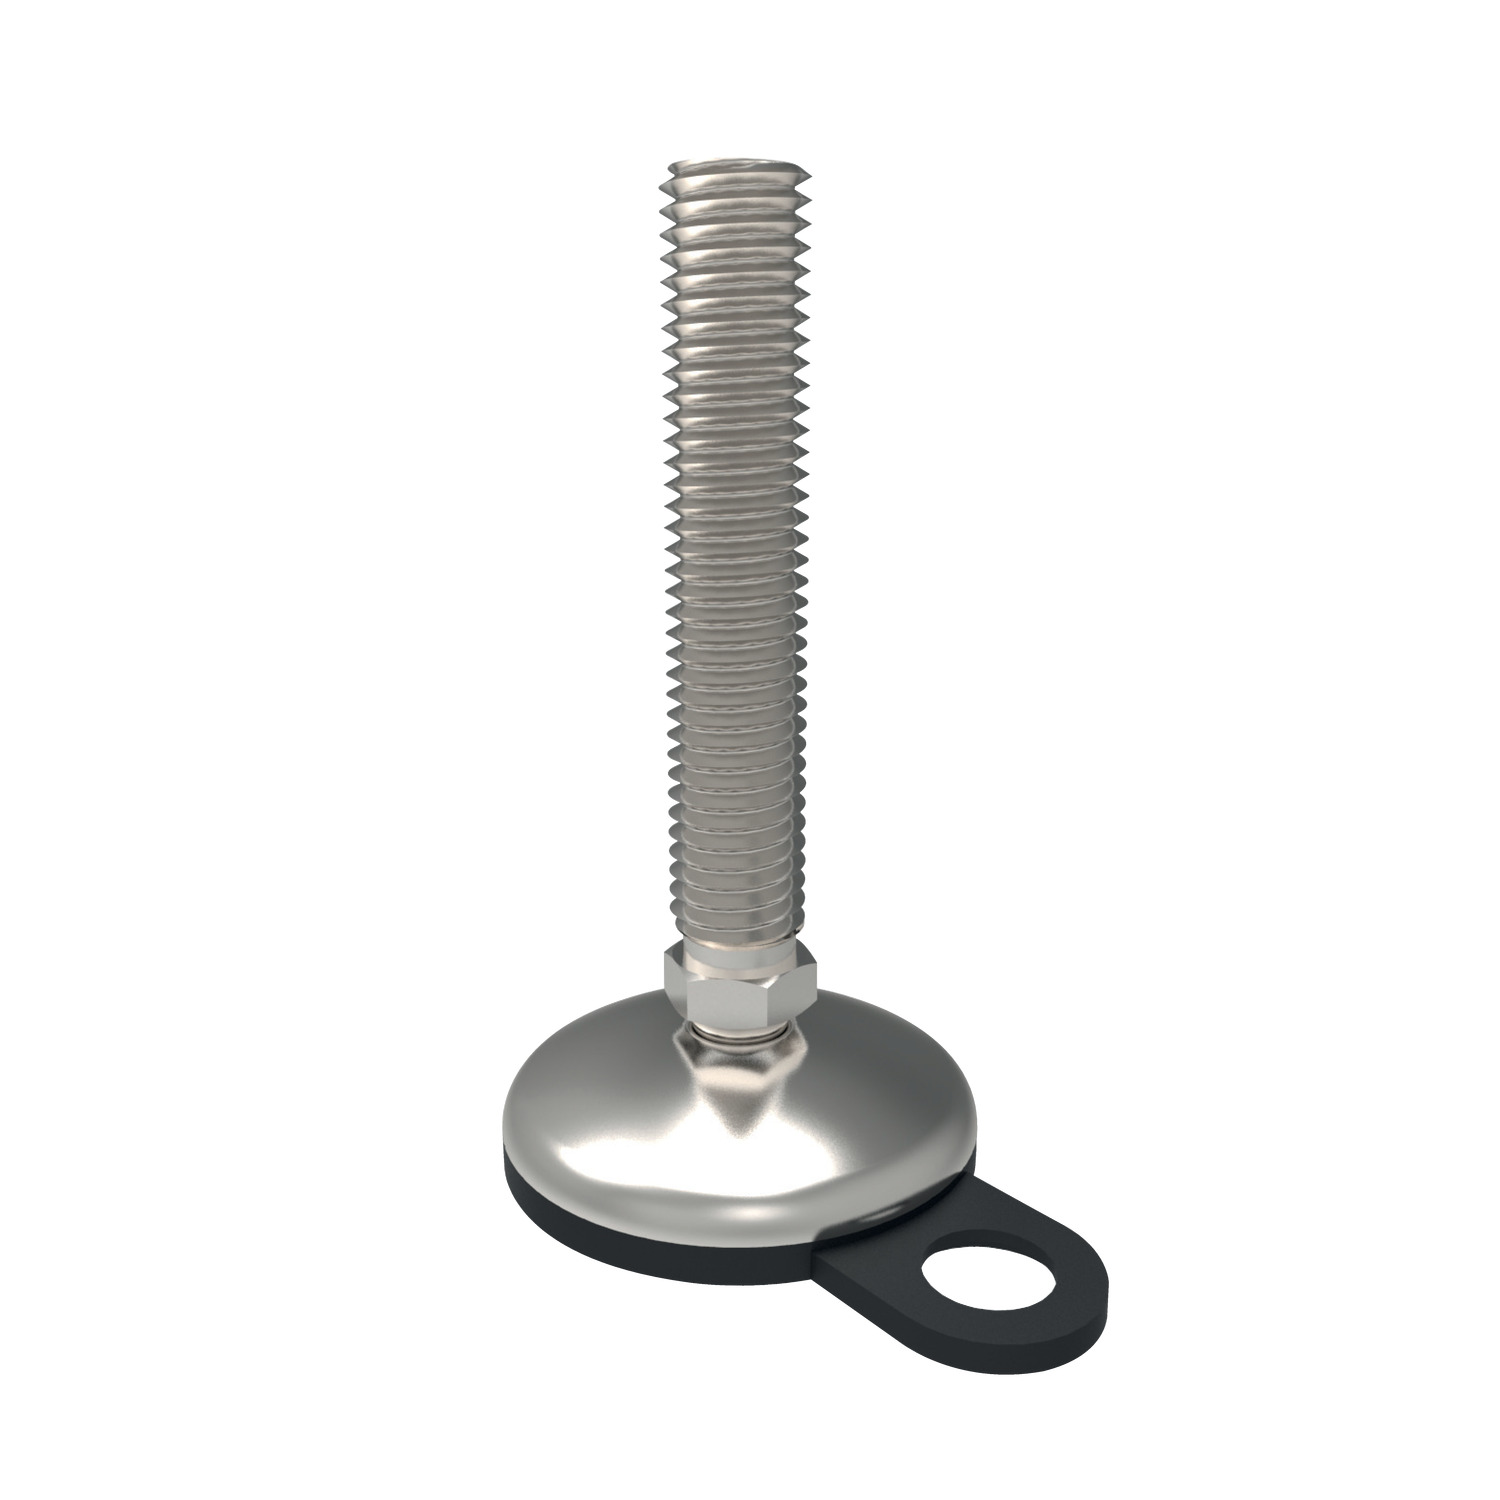 Product P2202, Machine Mount - Bolt Down pad and bolt - stainless steel / 